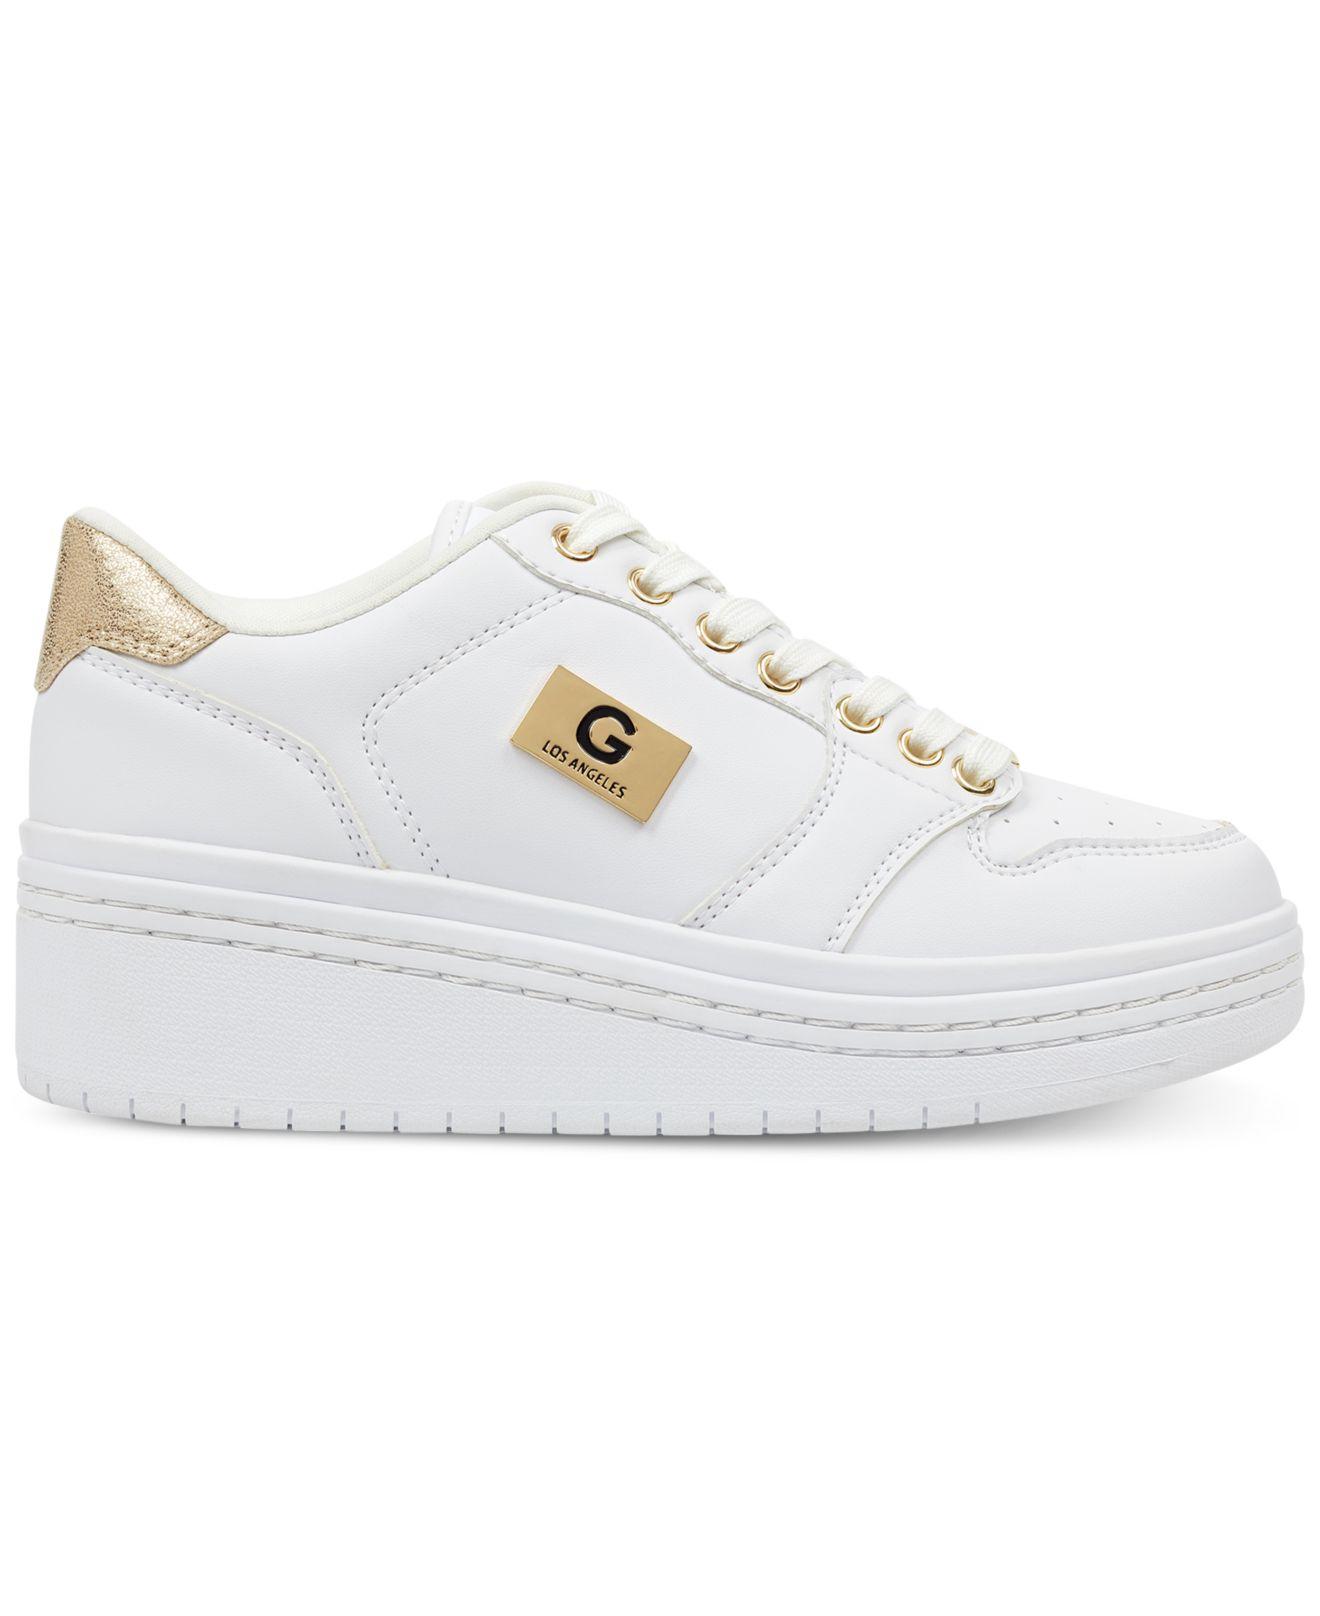 g by guess register wedge sneakers